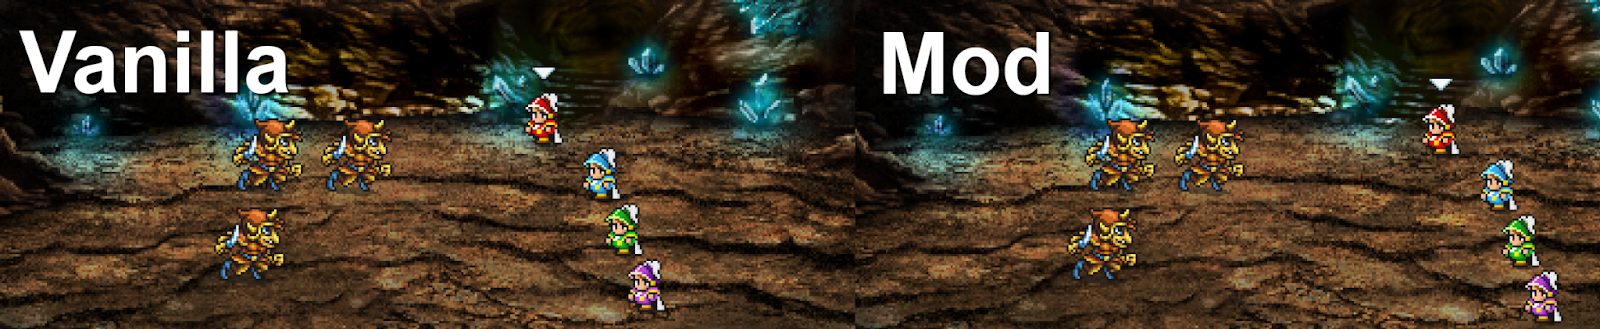 FF3: Complete Modding Guide and Index image 181